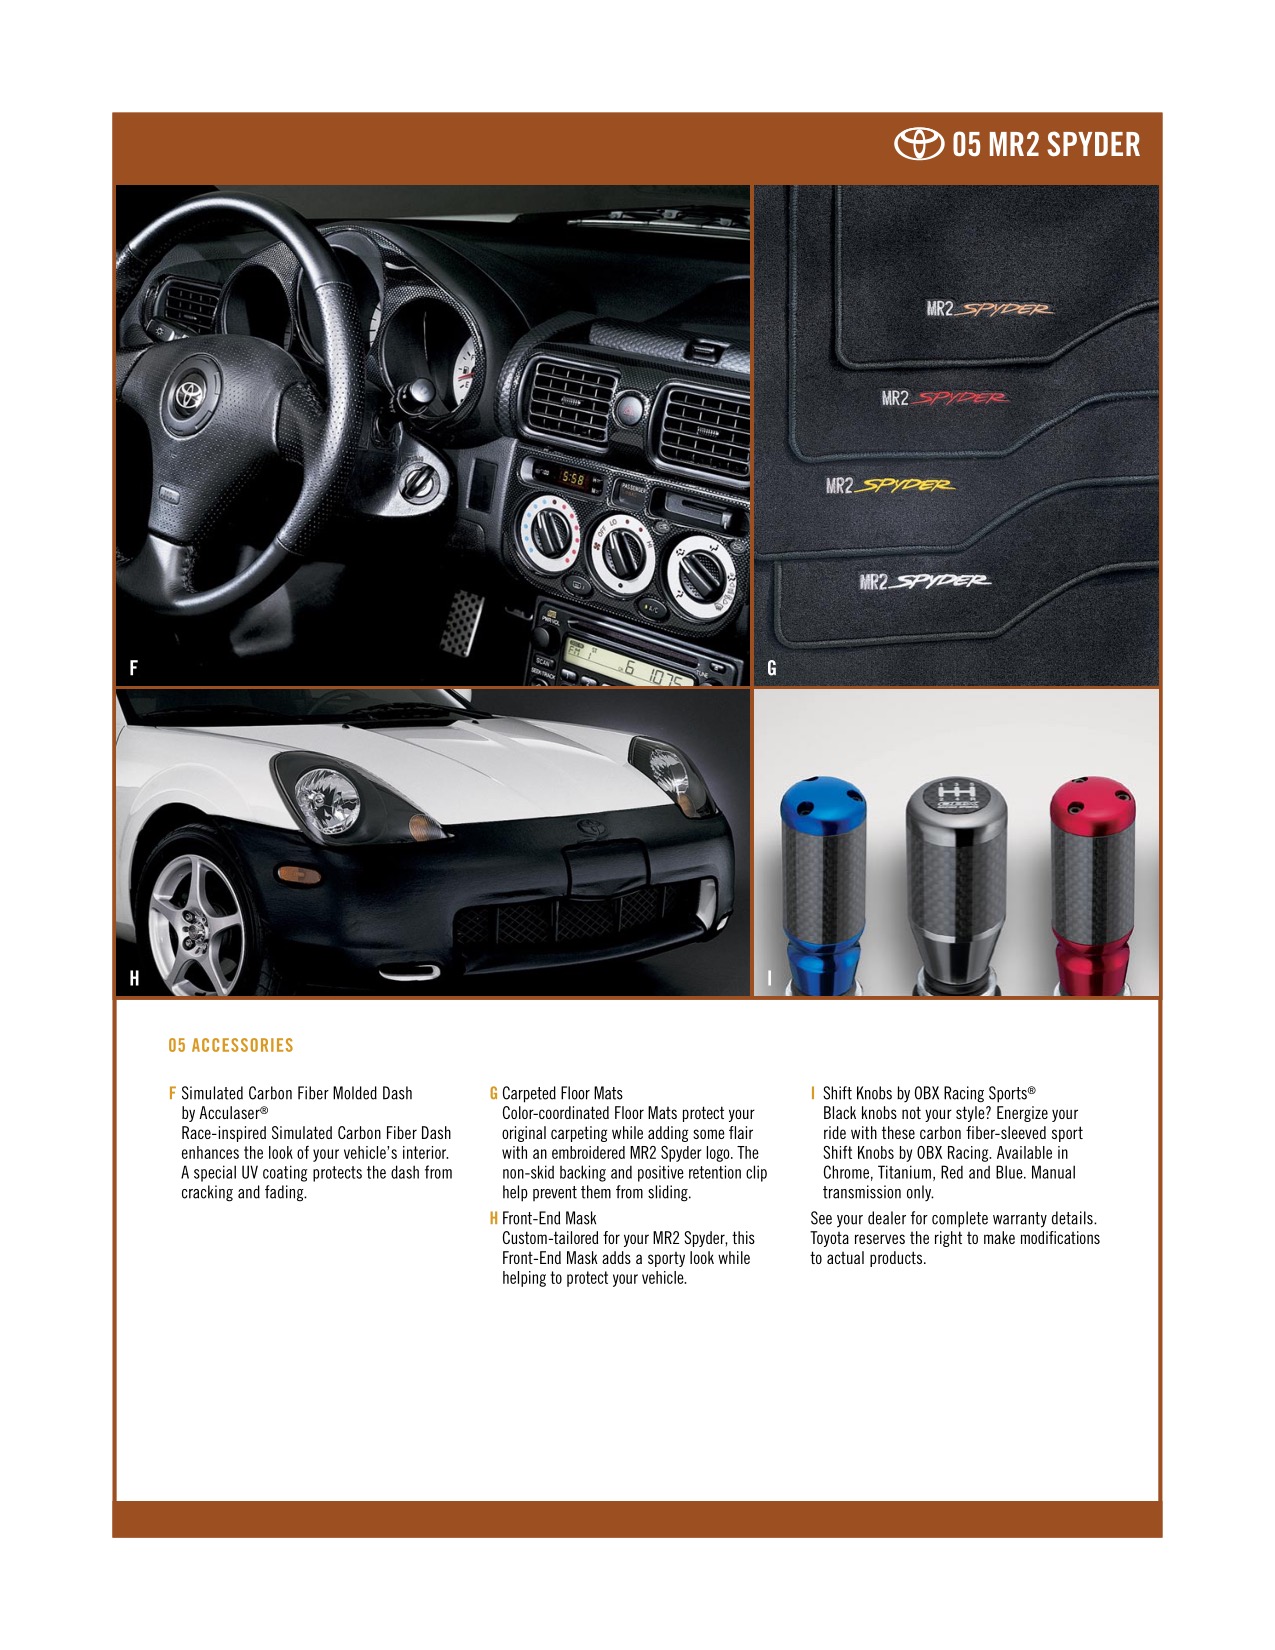 2005 Toyota MR2 Brochure Page 1